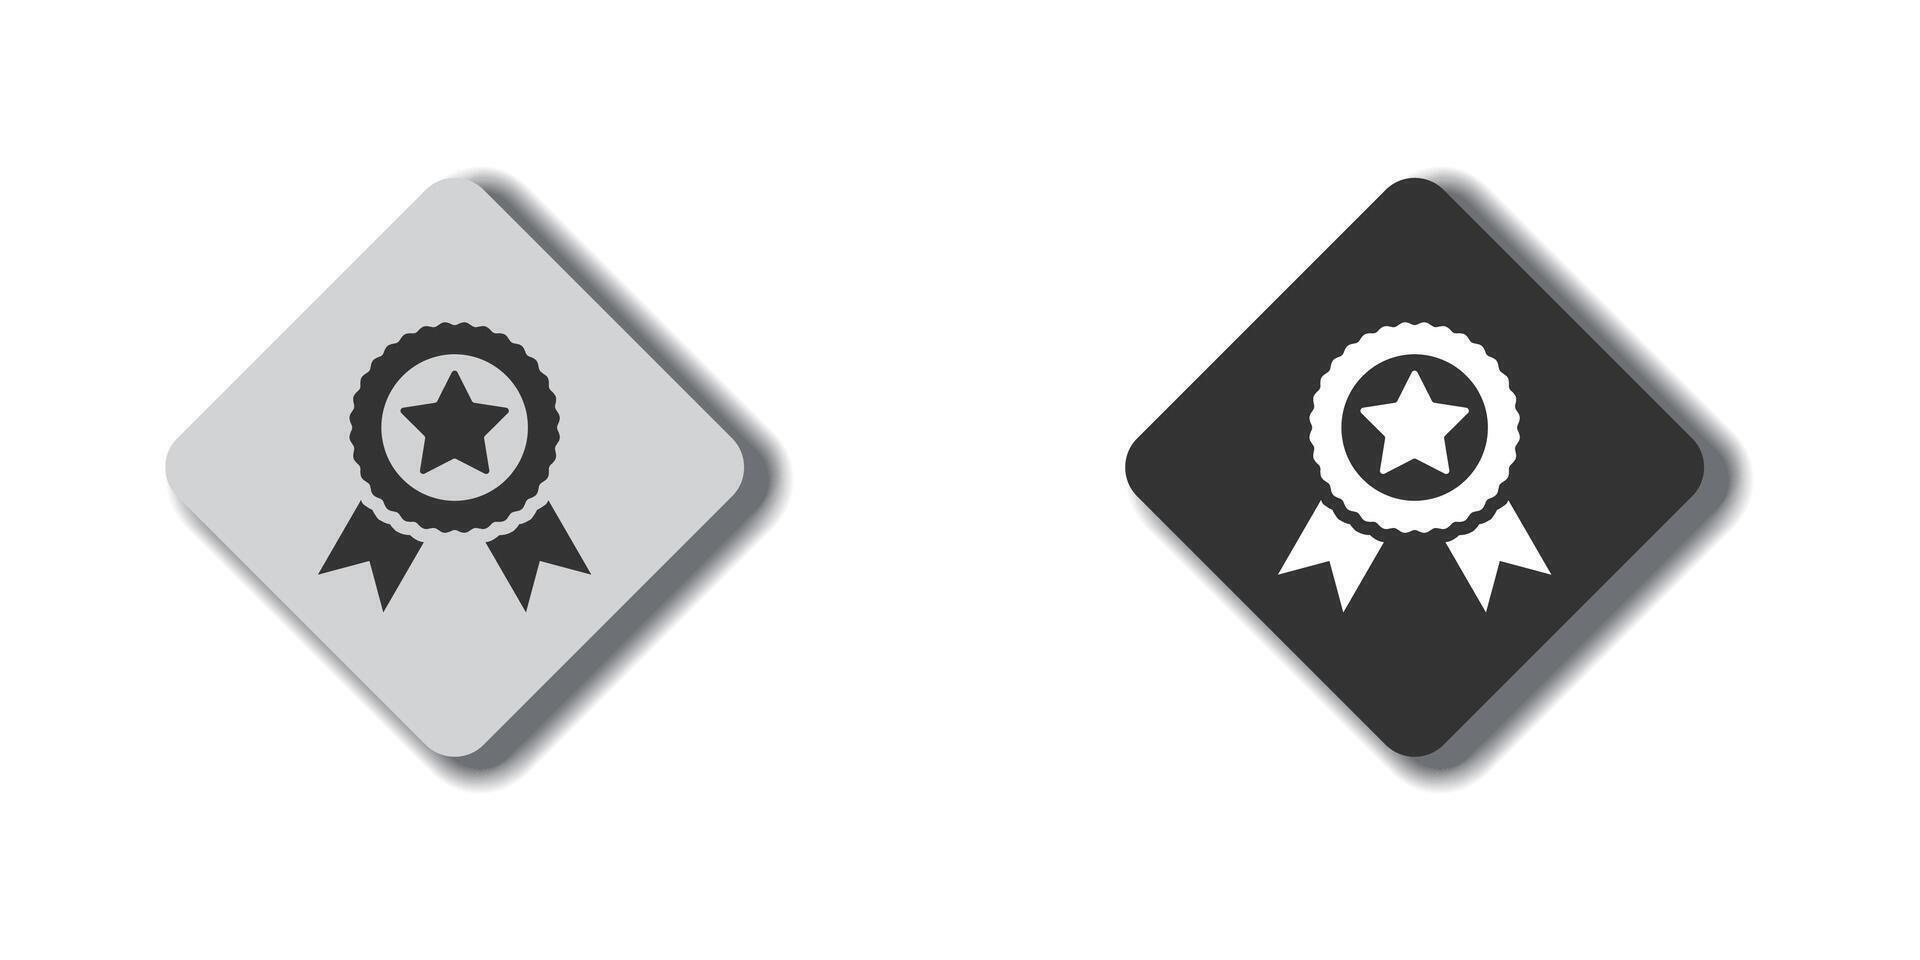 Premium quality icon. Best quality symbol. Winning award sign. Medal badge with star, and ribbons. Vector illustration.